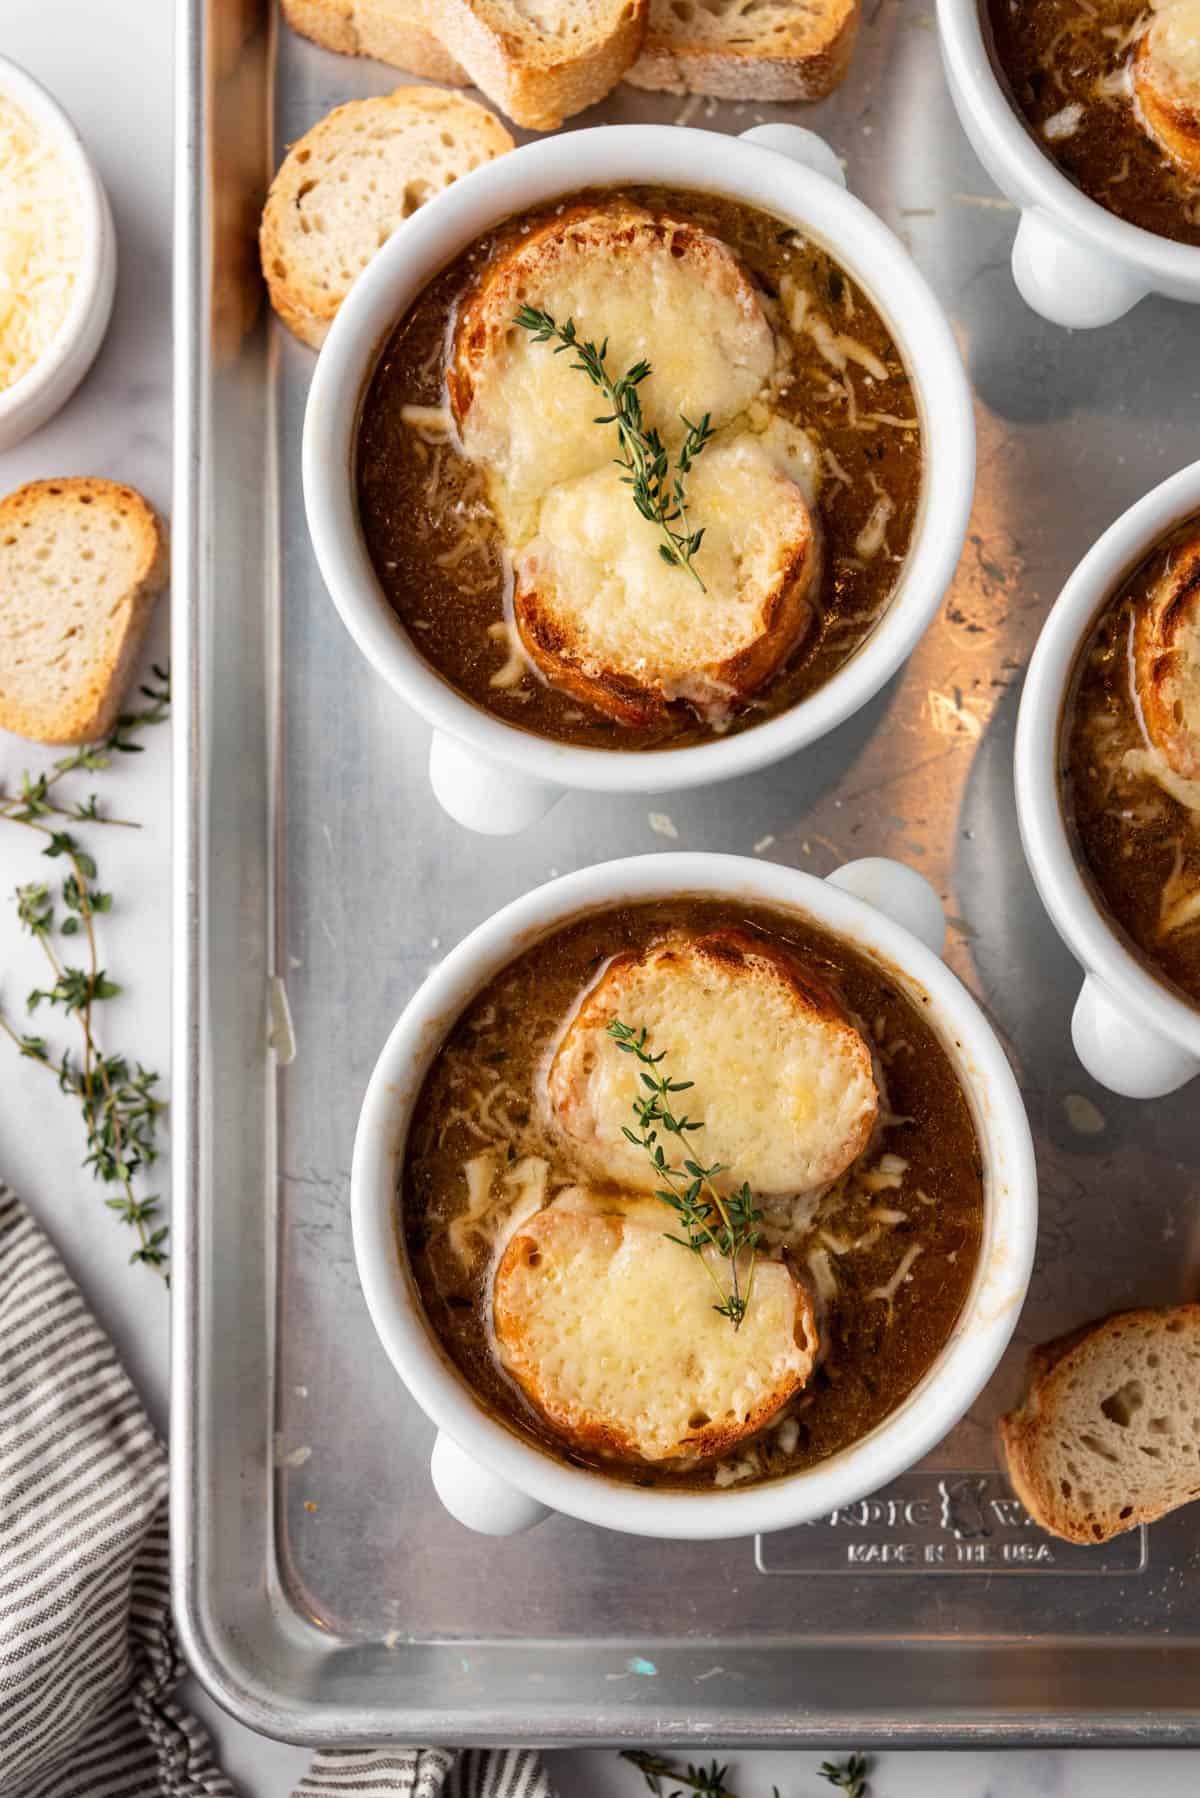 An overhead image of bowls of French onion soup on a baking sheet.